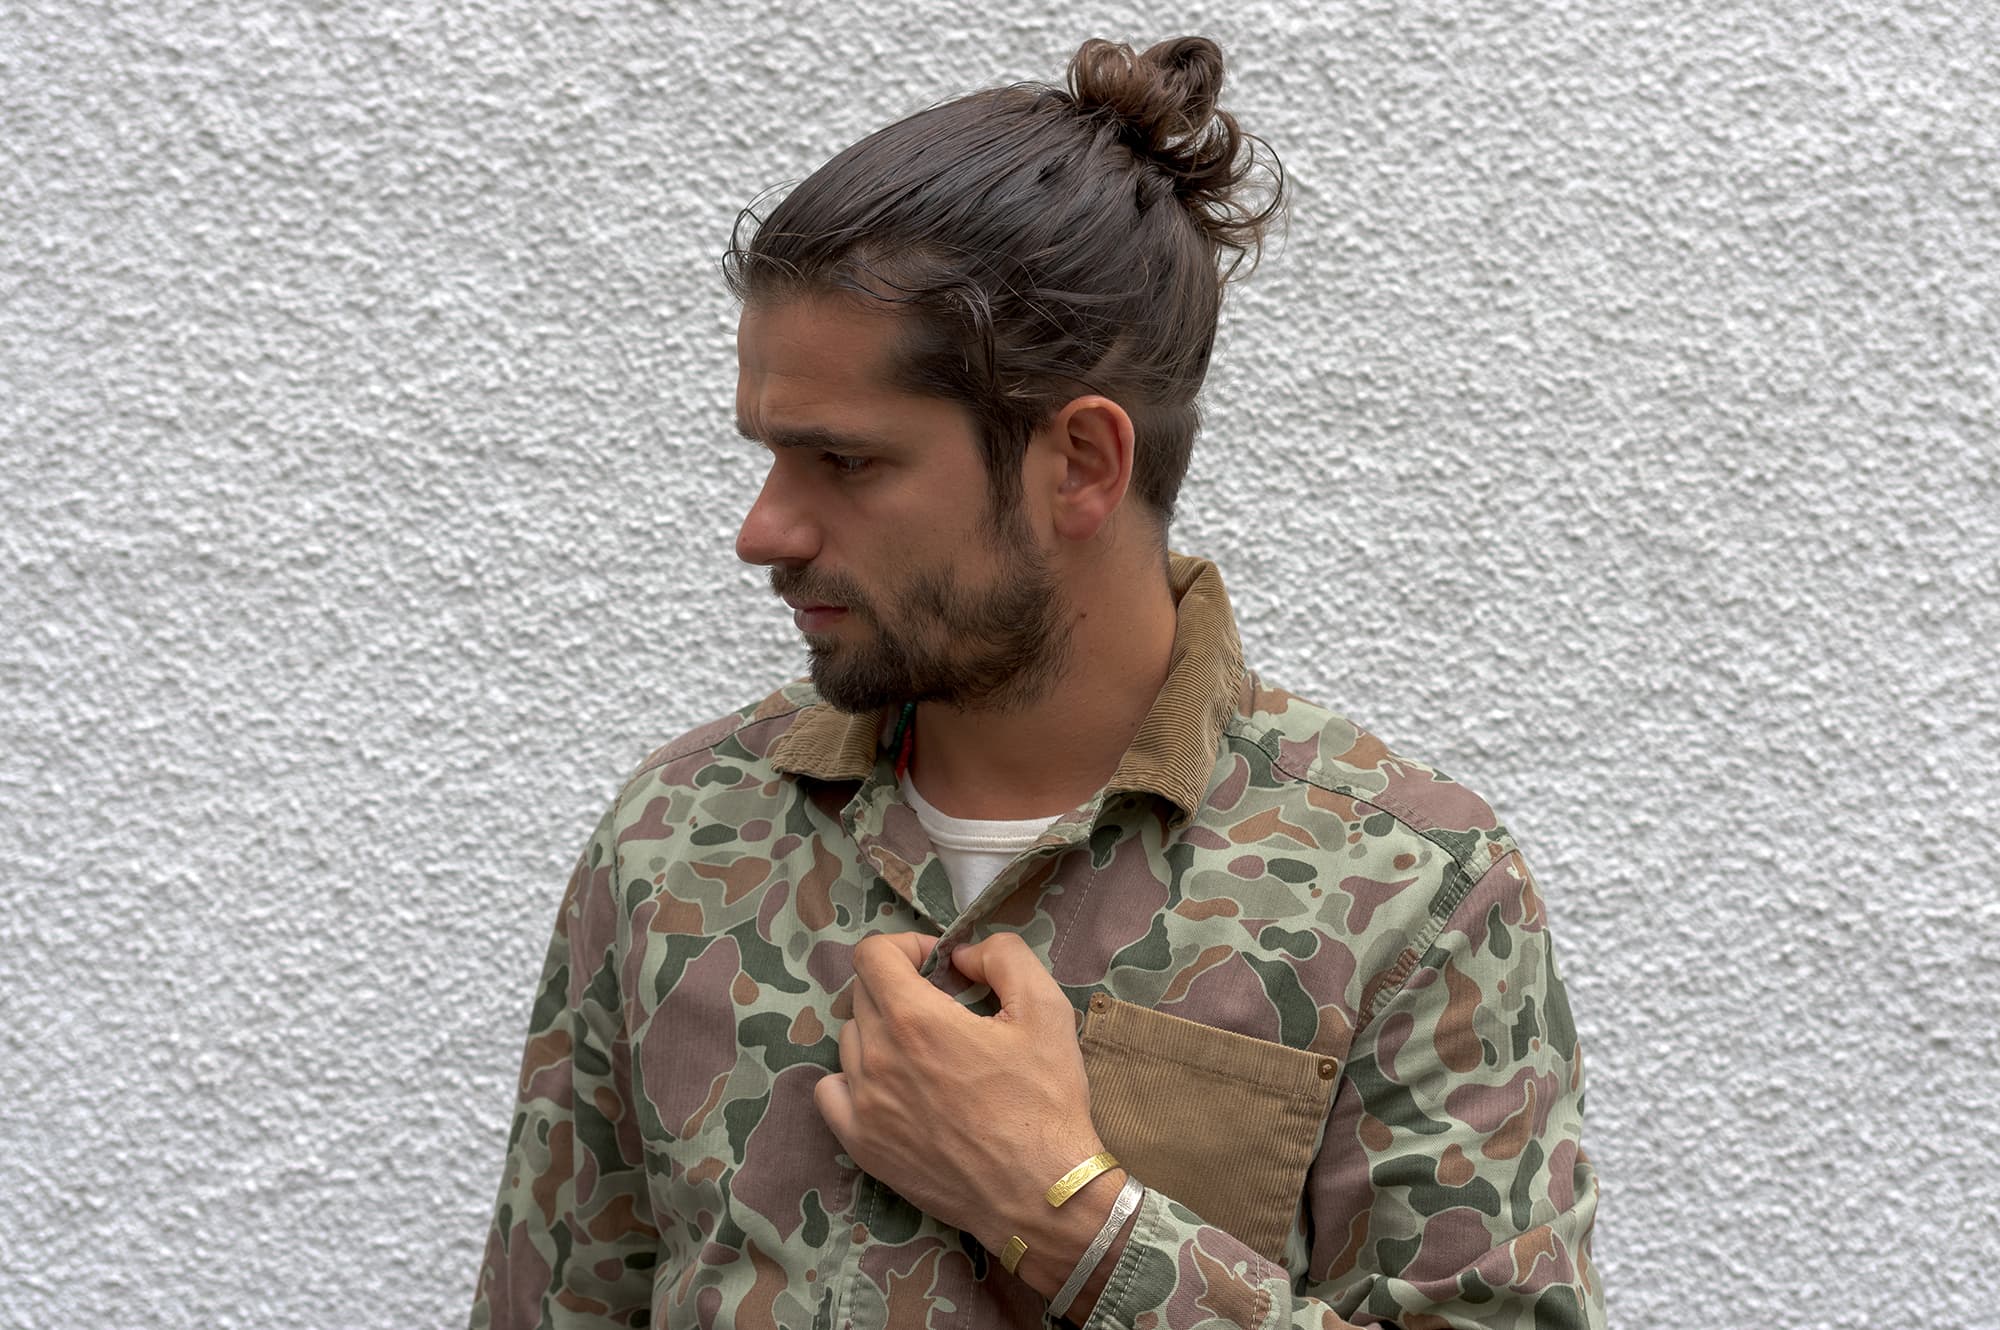 workwear oufit from edwin denim brand with a camo pattern and visvim virgil boots